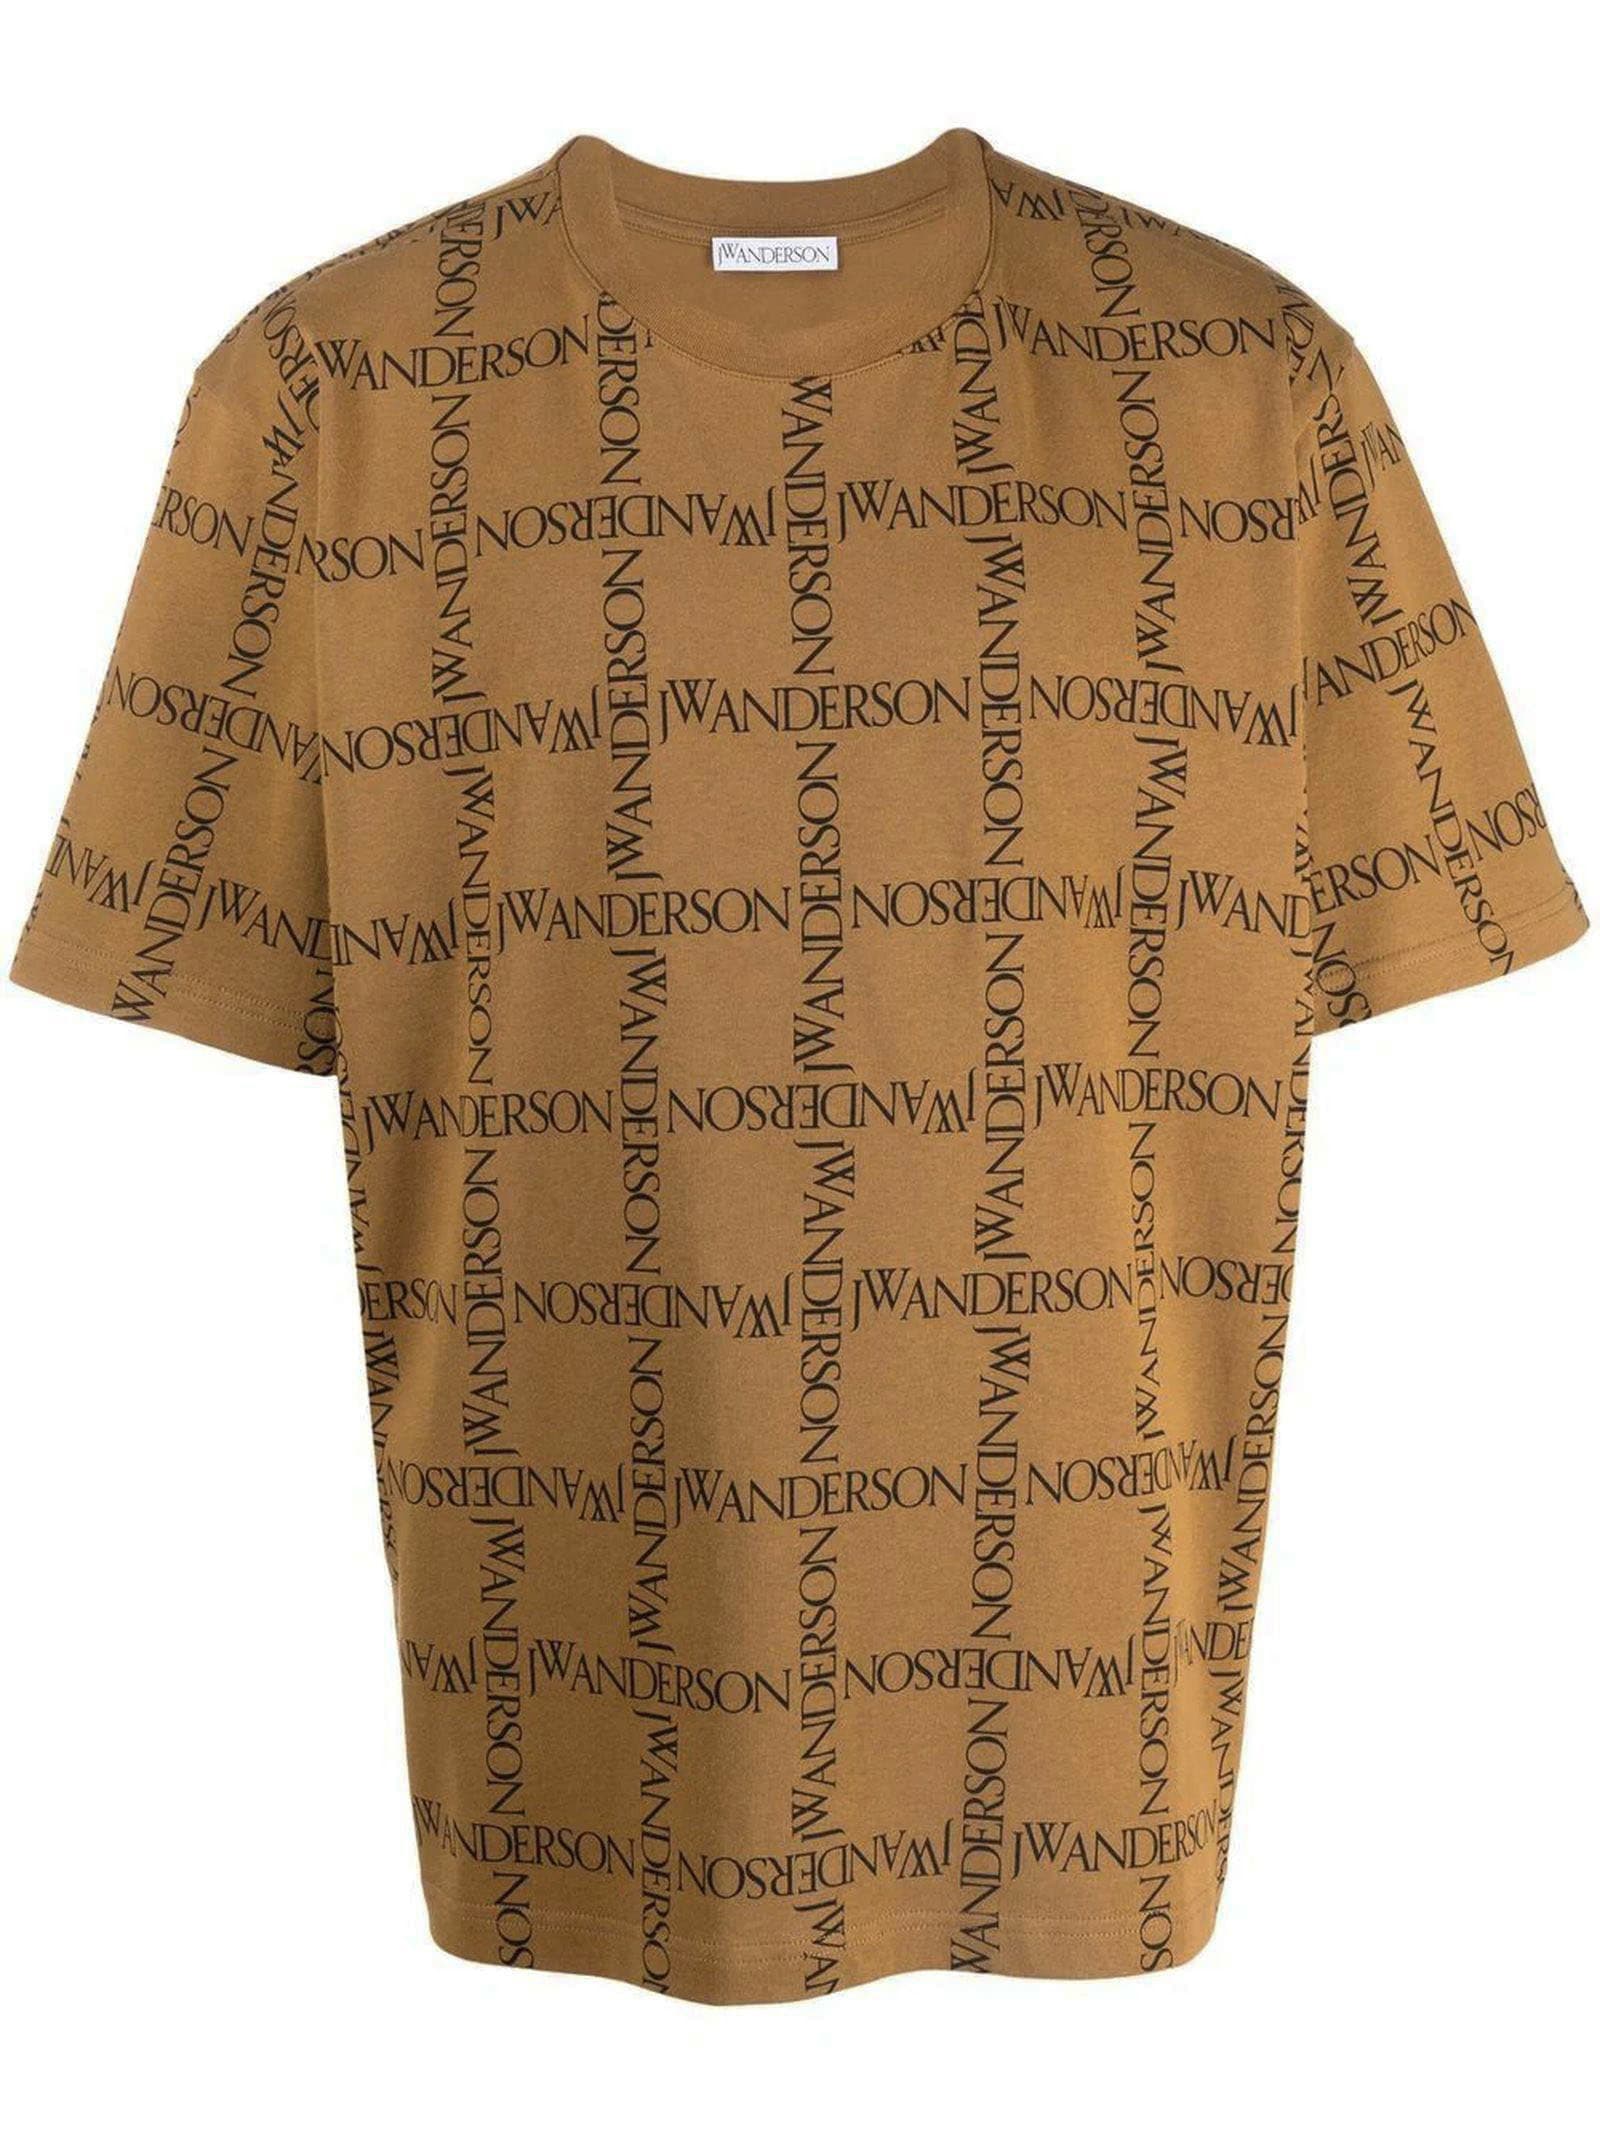 JW ANDERSON TOBACCO AND BLACK COTTON T-SHIRT,JT0044PG0482 619